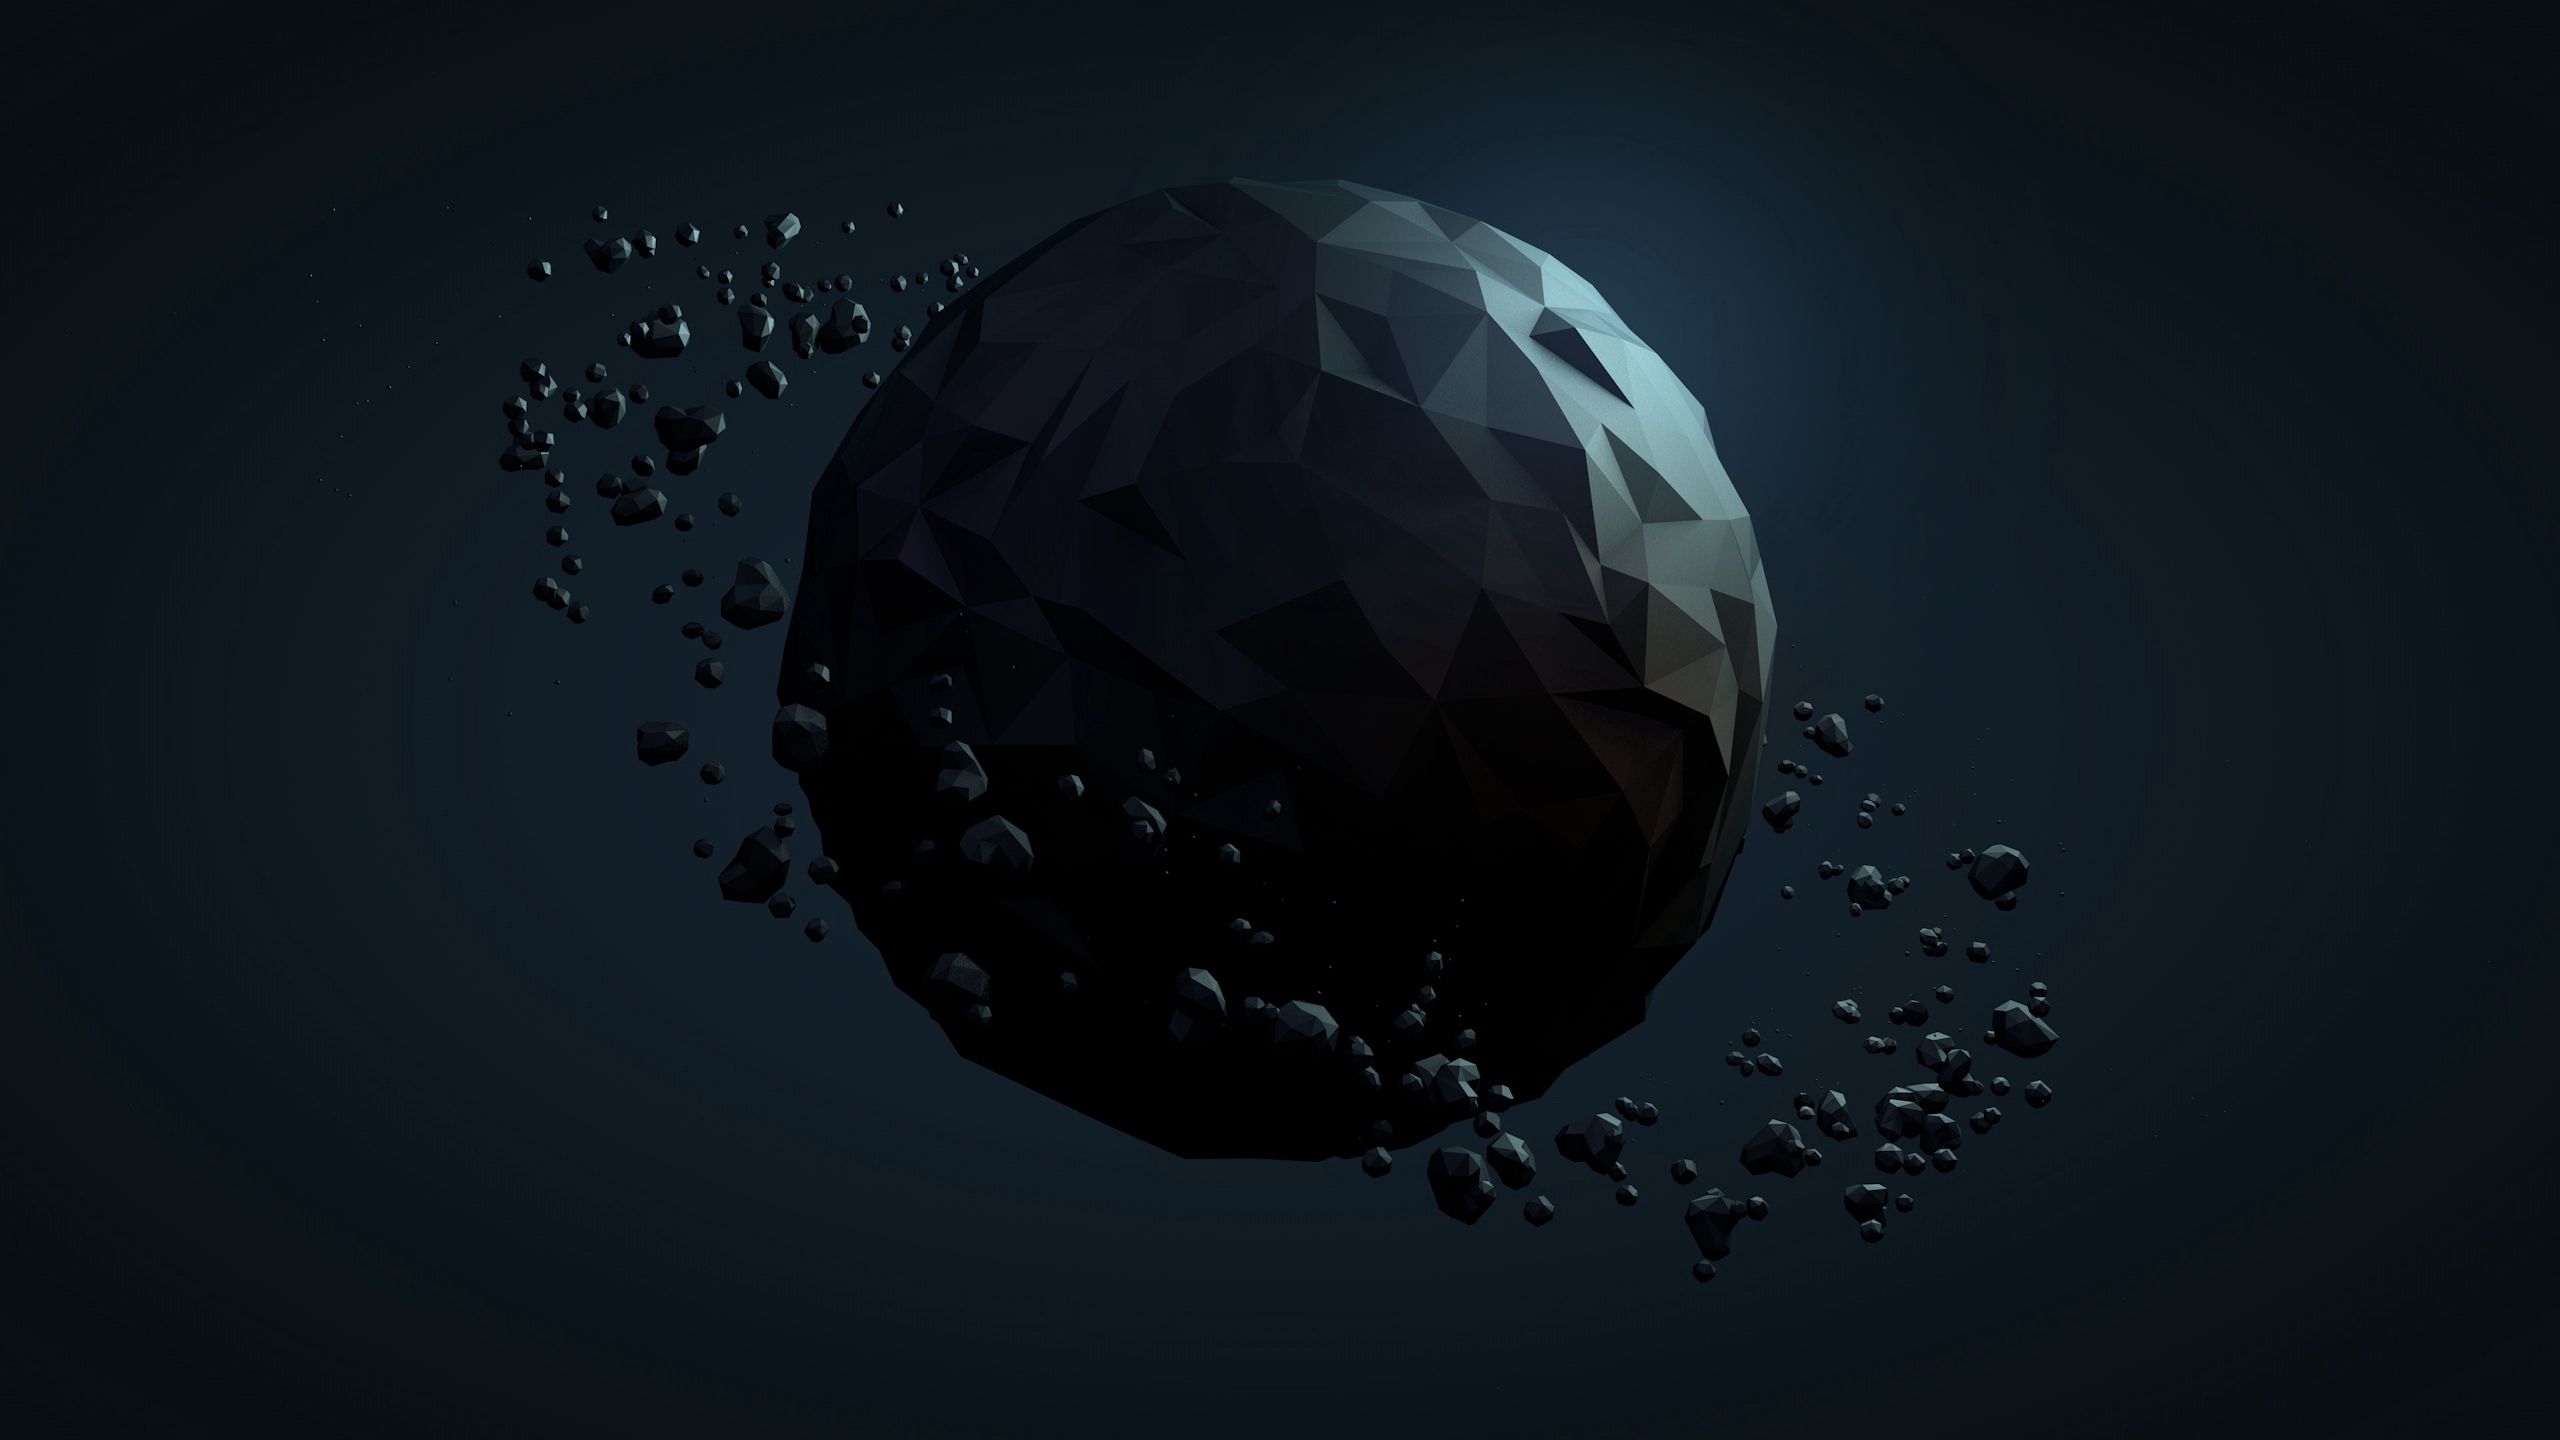 dark, planet, abstract, background, ball cellphone